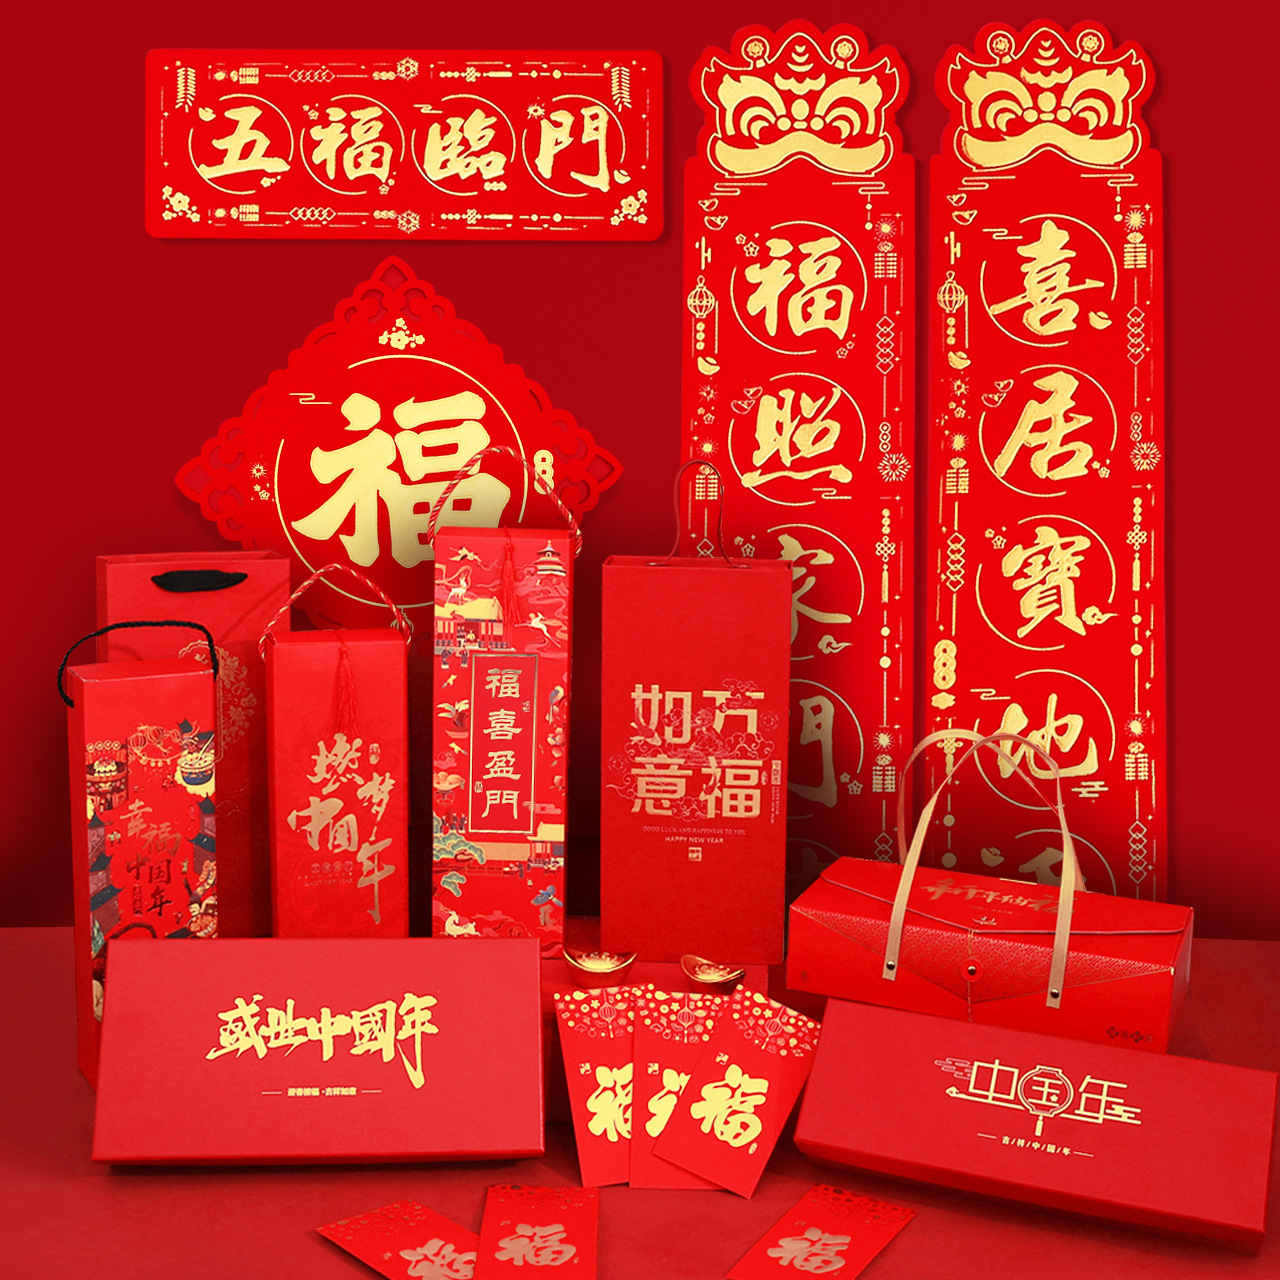 New Year Flocking Couplet Wholesale Gilding Couplet Custom Logo Fu Character Red Envelope Spring Festival Scrolls Couplets Year of the Dragon Gift Set